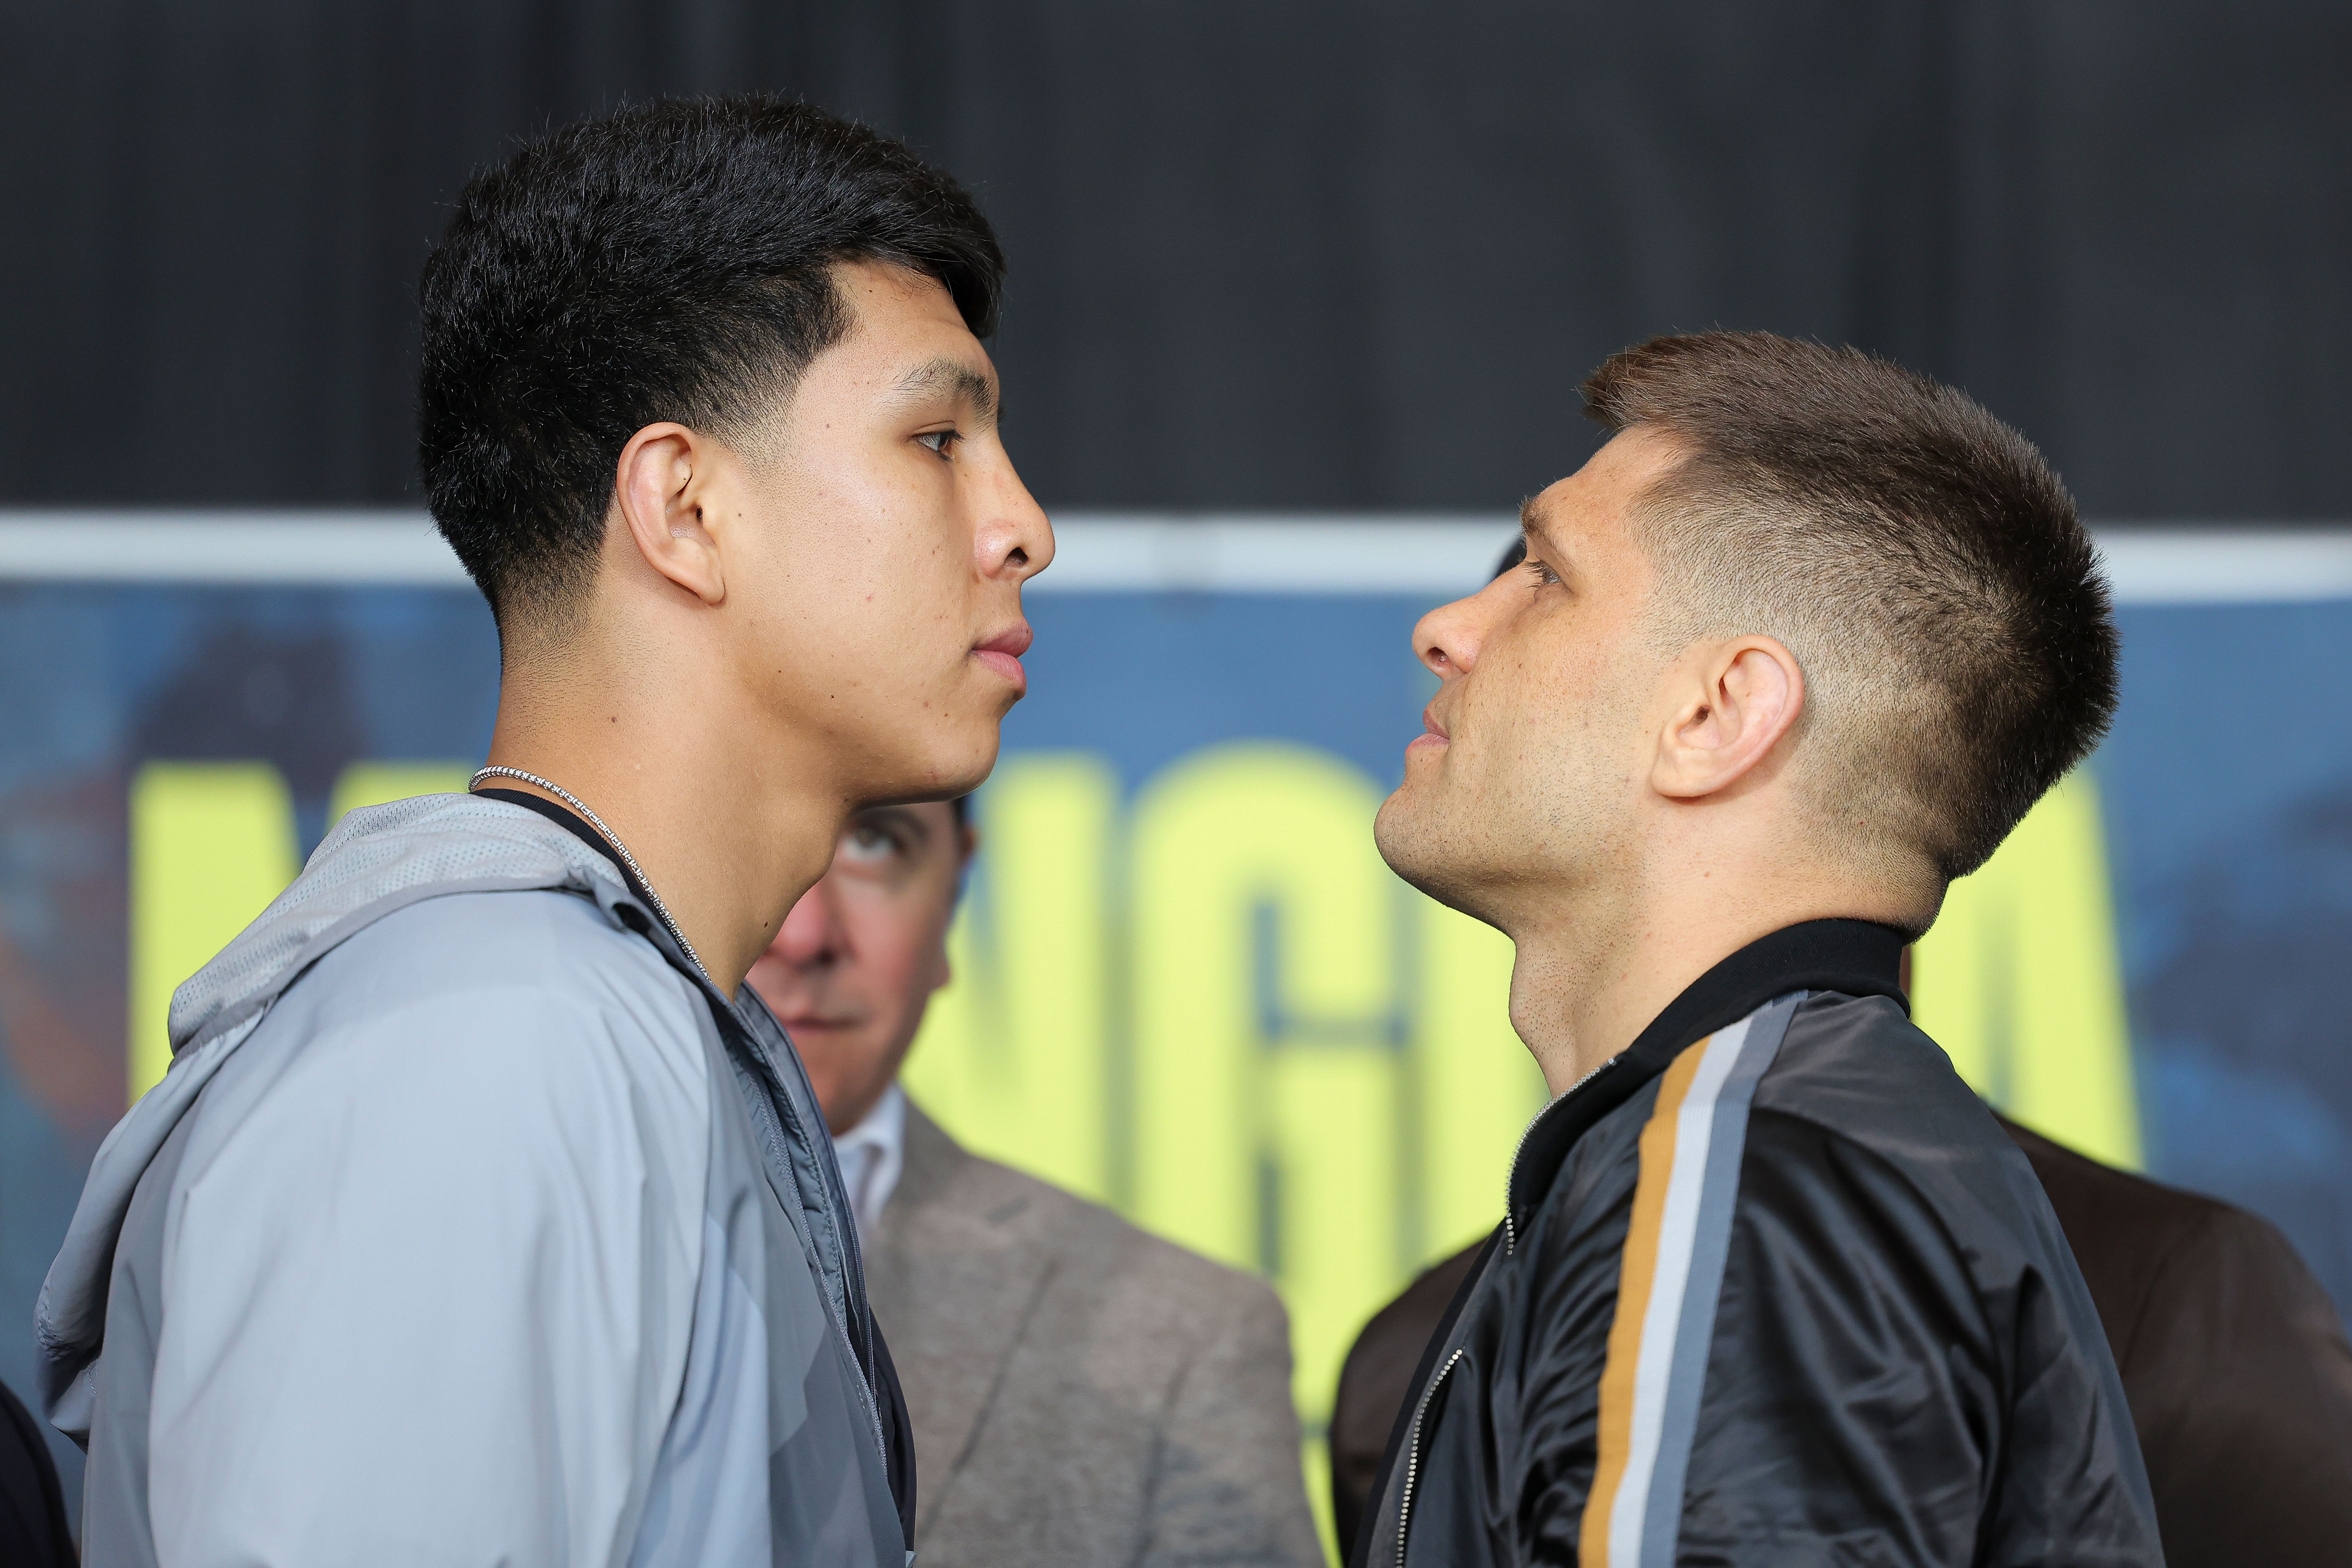 Jaime Munguia and Sergiy Derevyanchenko Show Mutual Respect At Press Conference